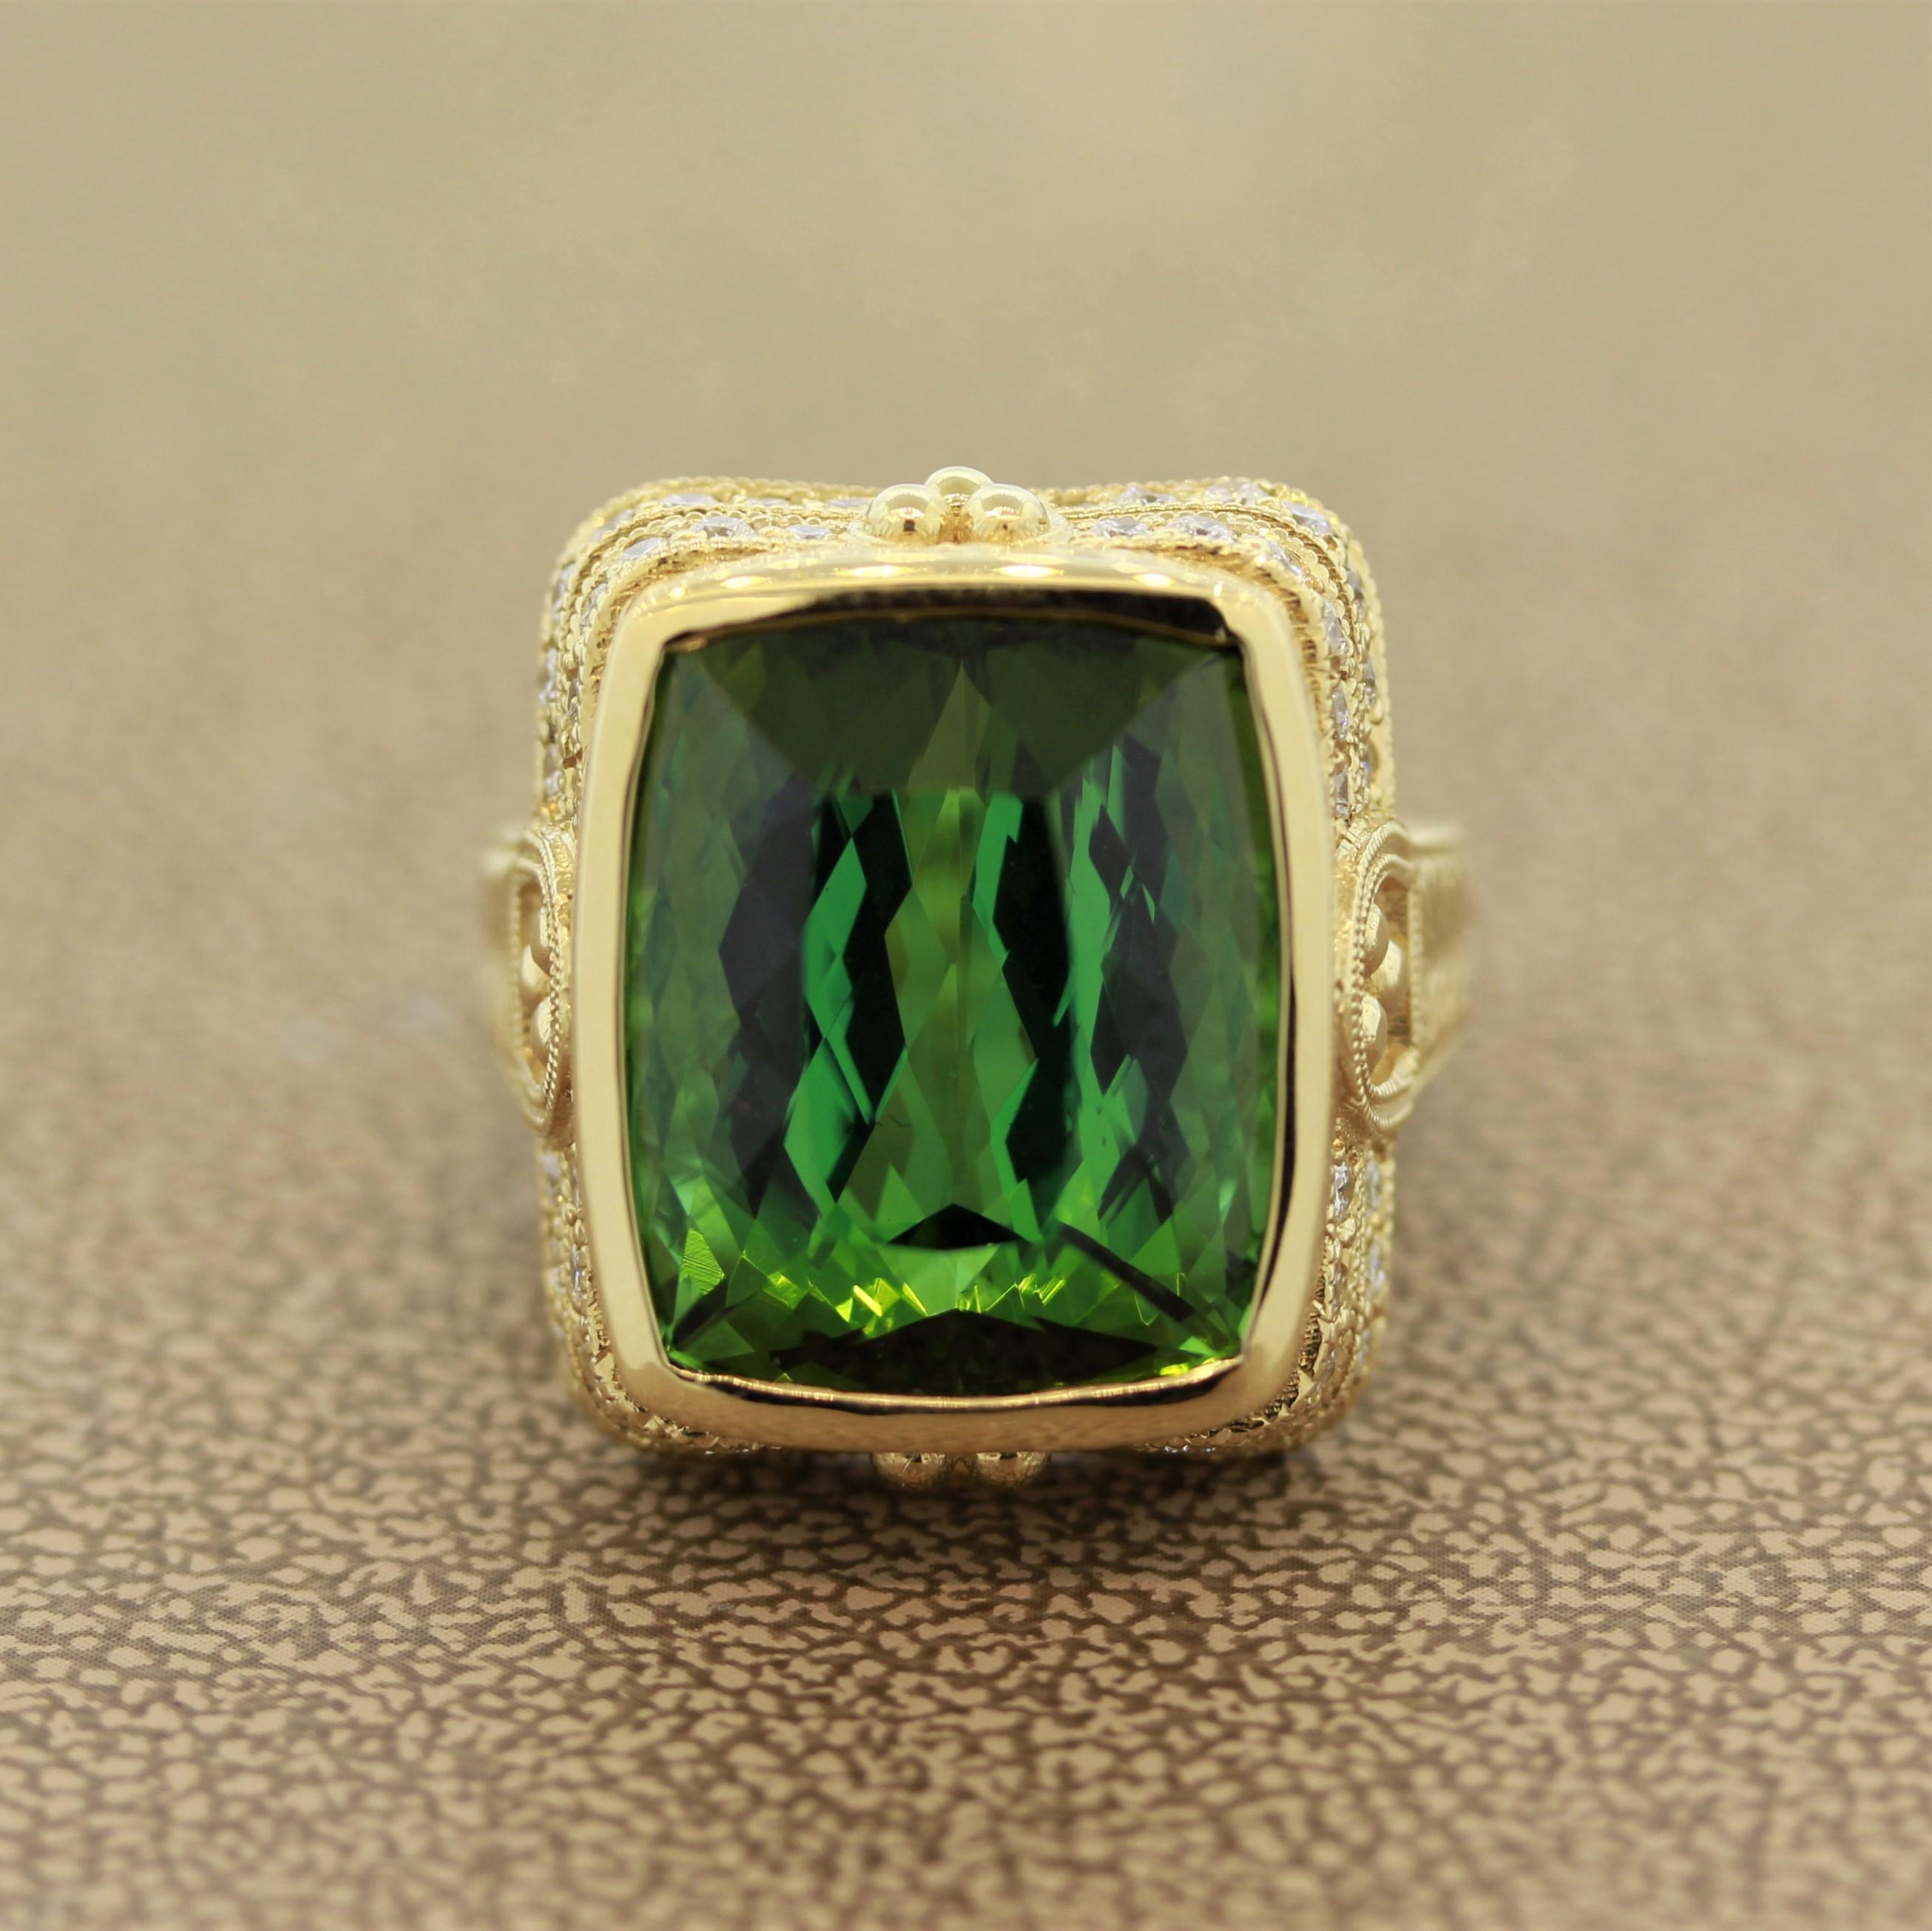 A large cocktail ring made in an antique style with milgrain settings and decorative filigree. It features a luscious green tourmaline weighing 17.85 carats with no visible inclusions. It is accented by 0.86 carats of round brilliant cut diamonds